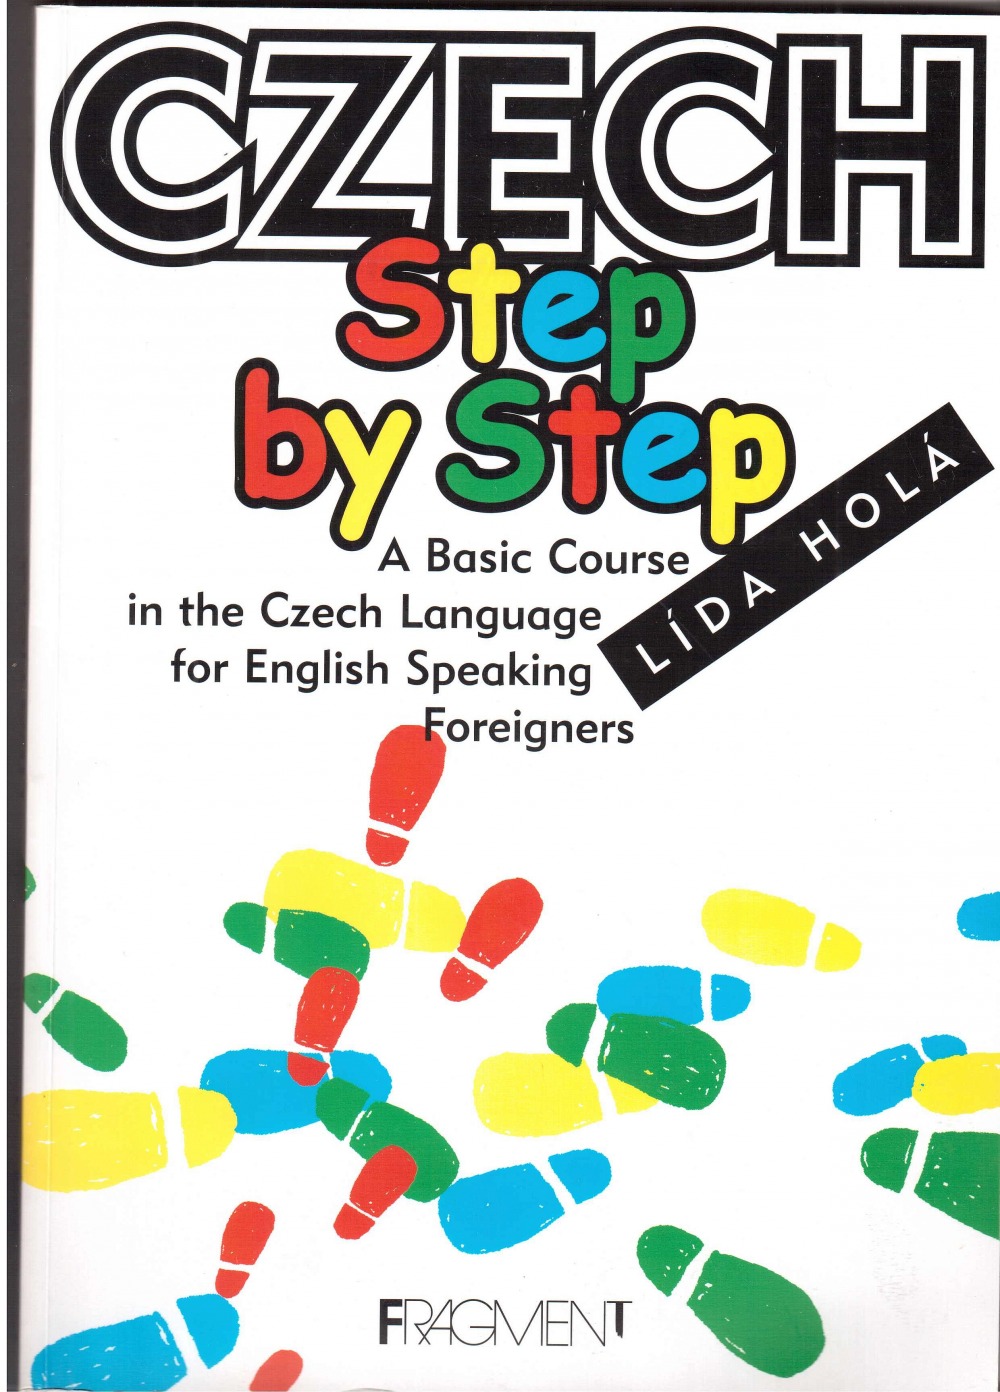 Czech Step by Step - A Basic Course in the Czech Language for English Speaking Foreigners